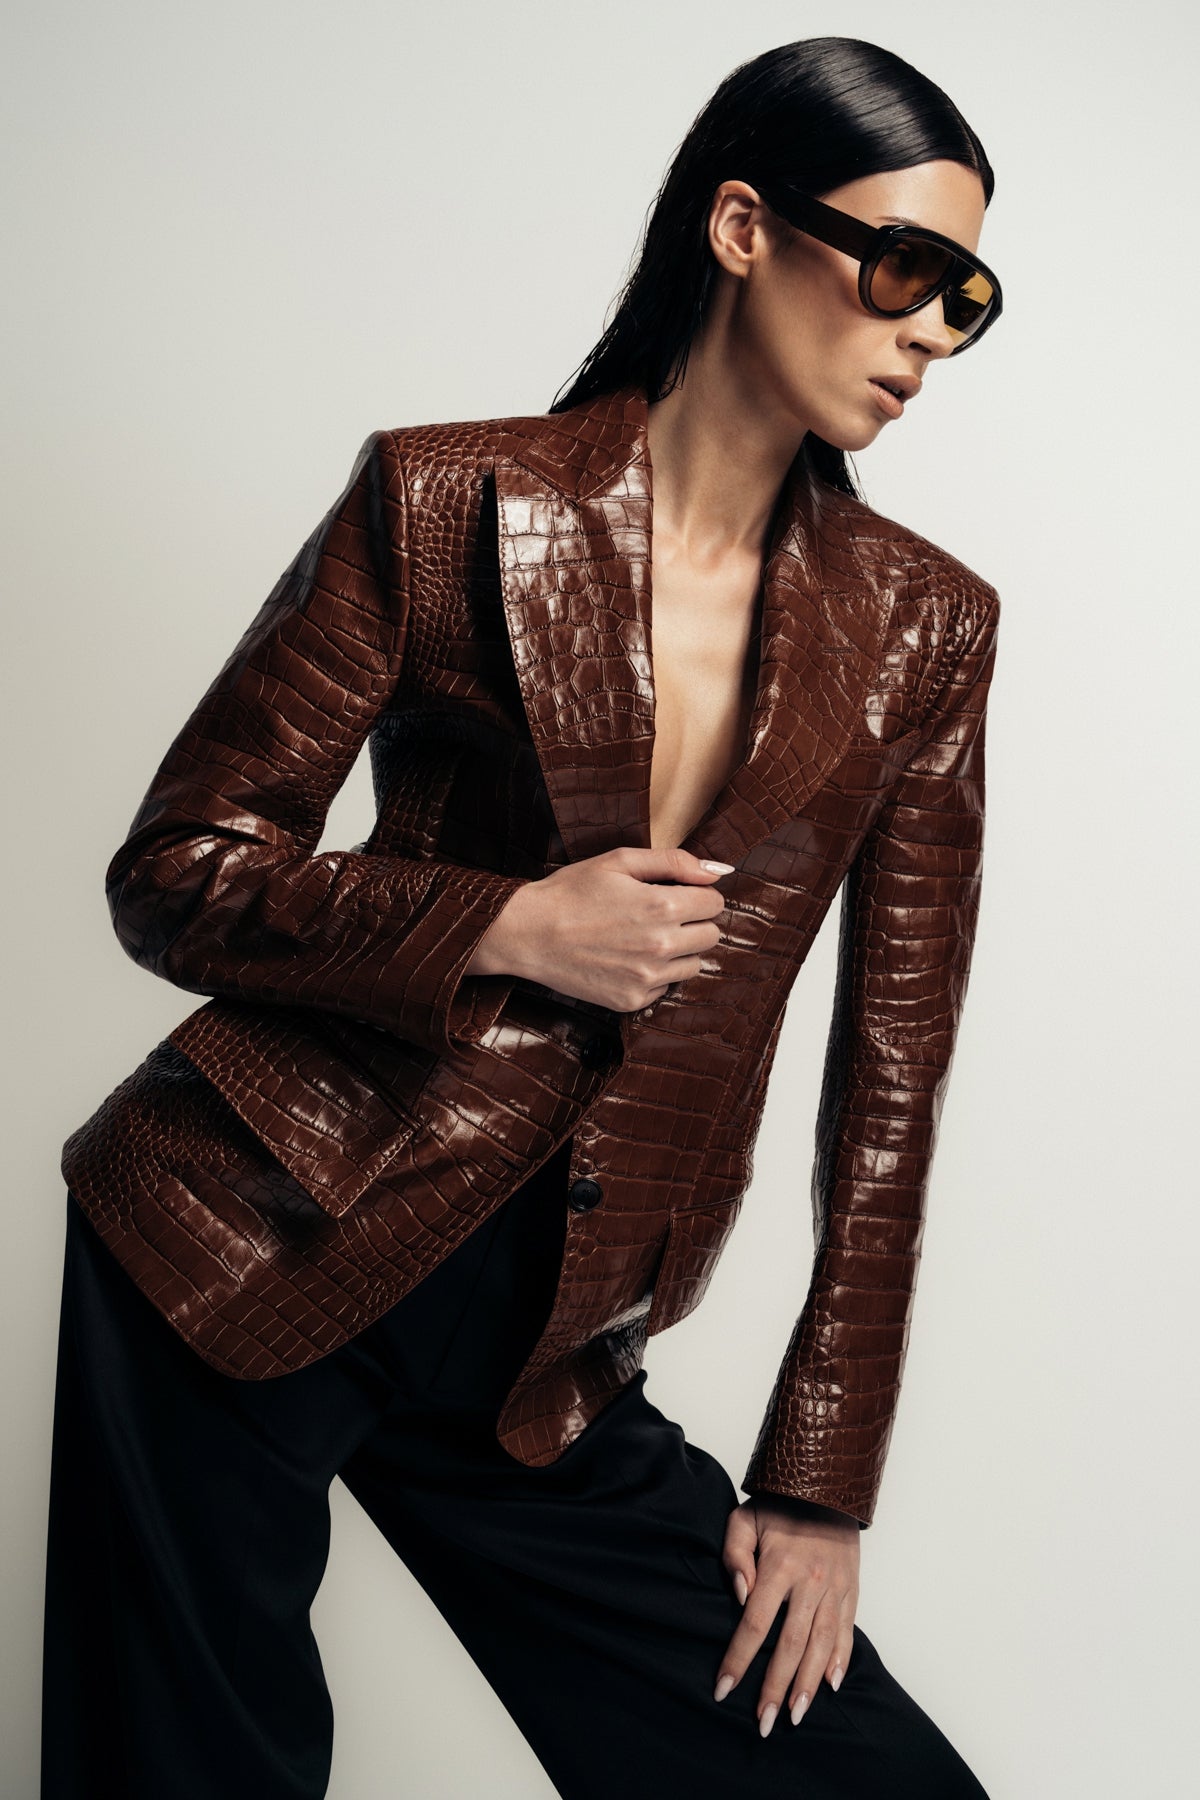 TOM FORD | CROCO EMBOSSED LAMB LEATHER "THE JACQUETTA" JACKET